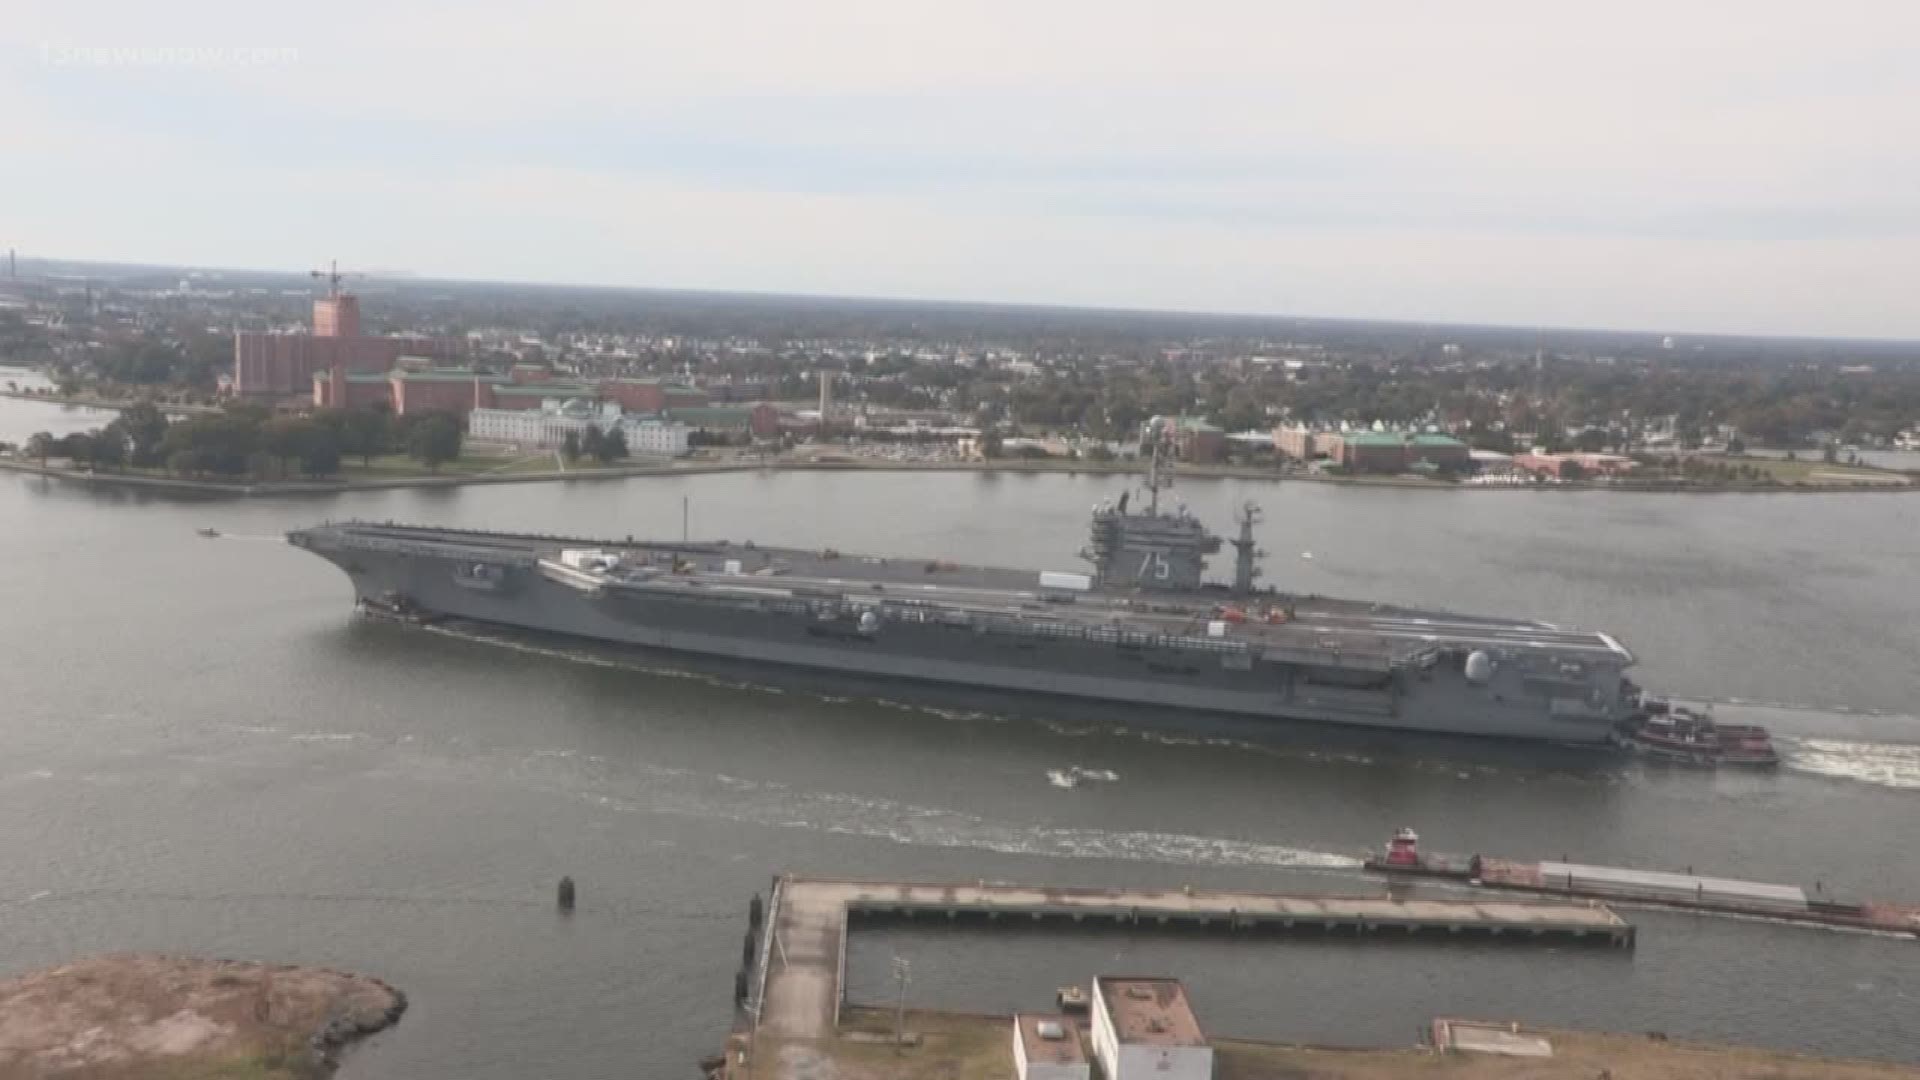 "Breaking Defense" said that the Pentagon plans to retire the Norfolk-based aircraft carrier at least 20 years ahead of its intended lifespan. Senator Tim Kaine is puzzled by the report.